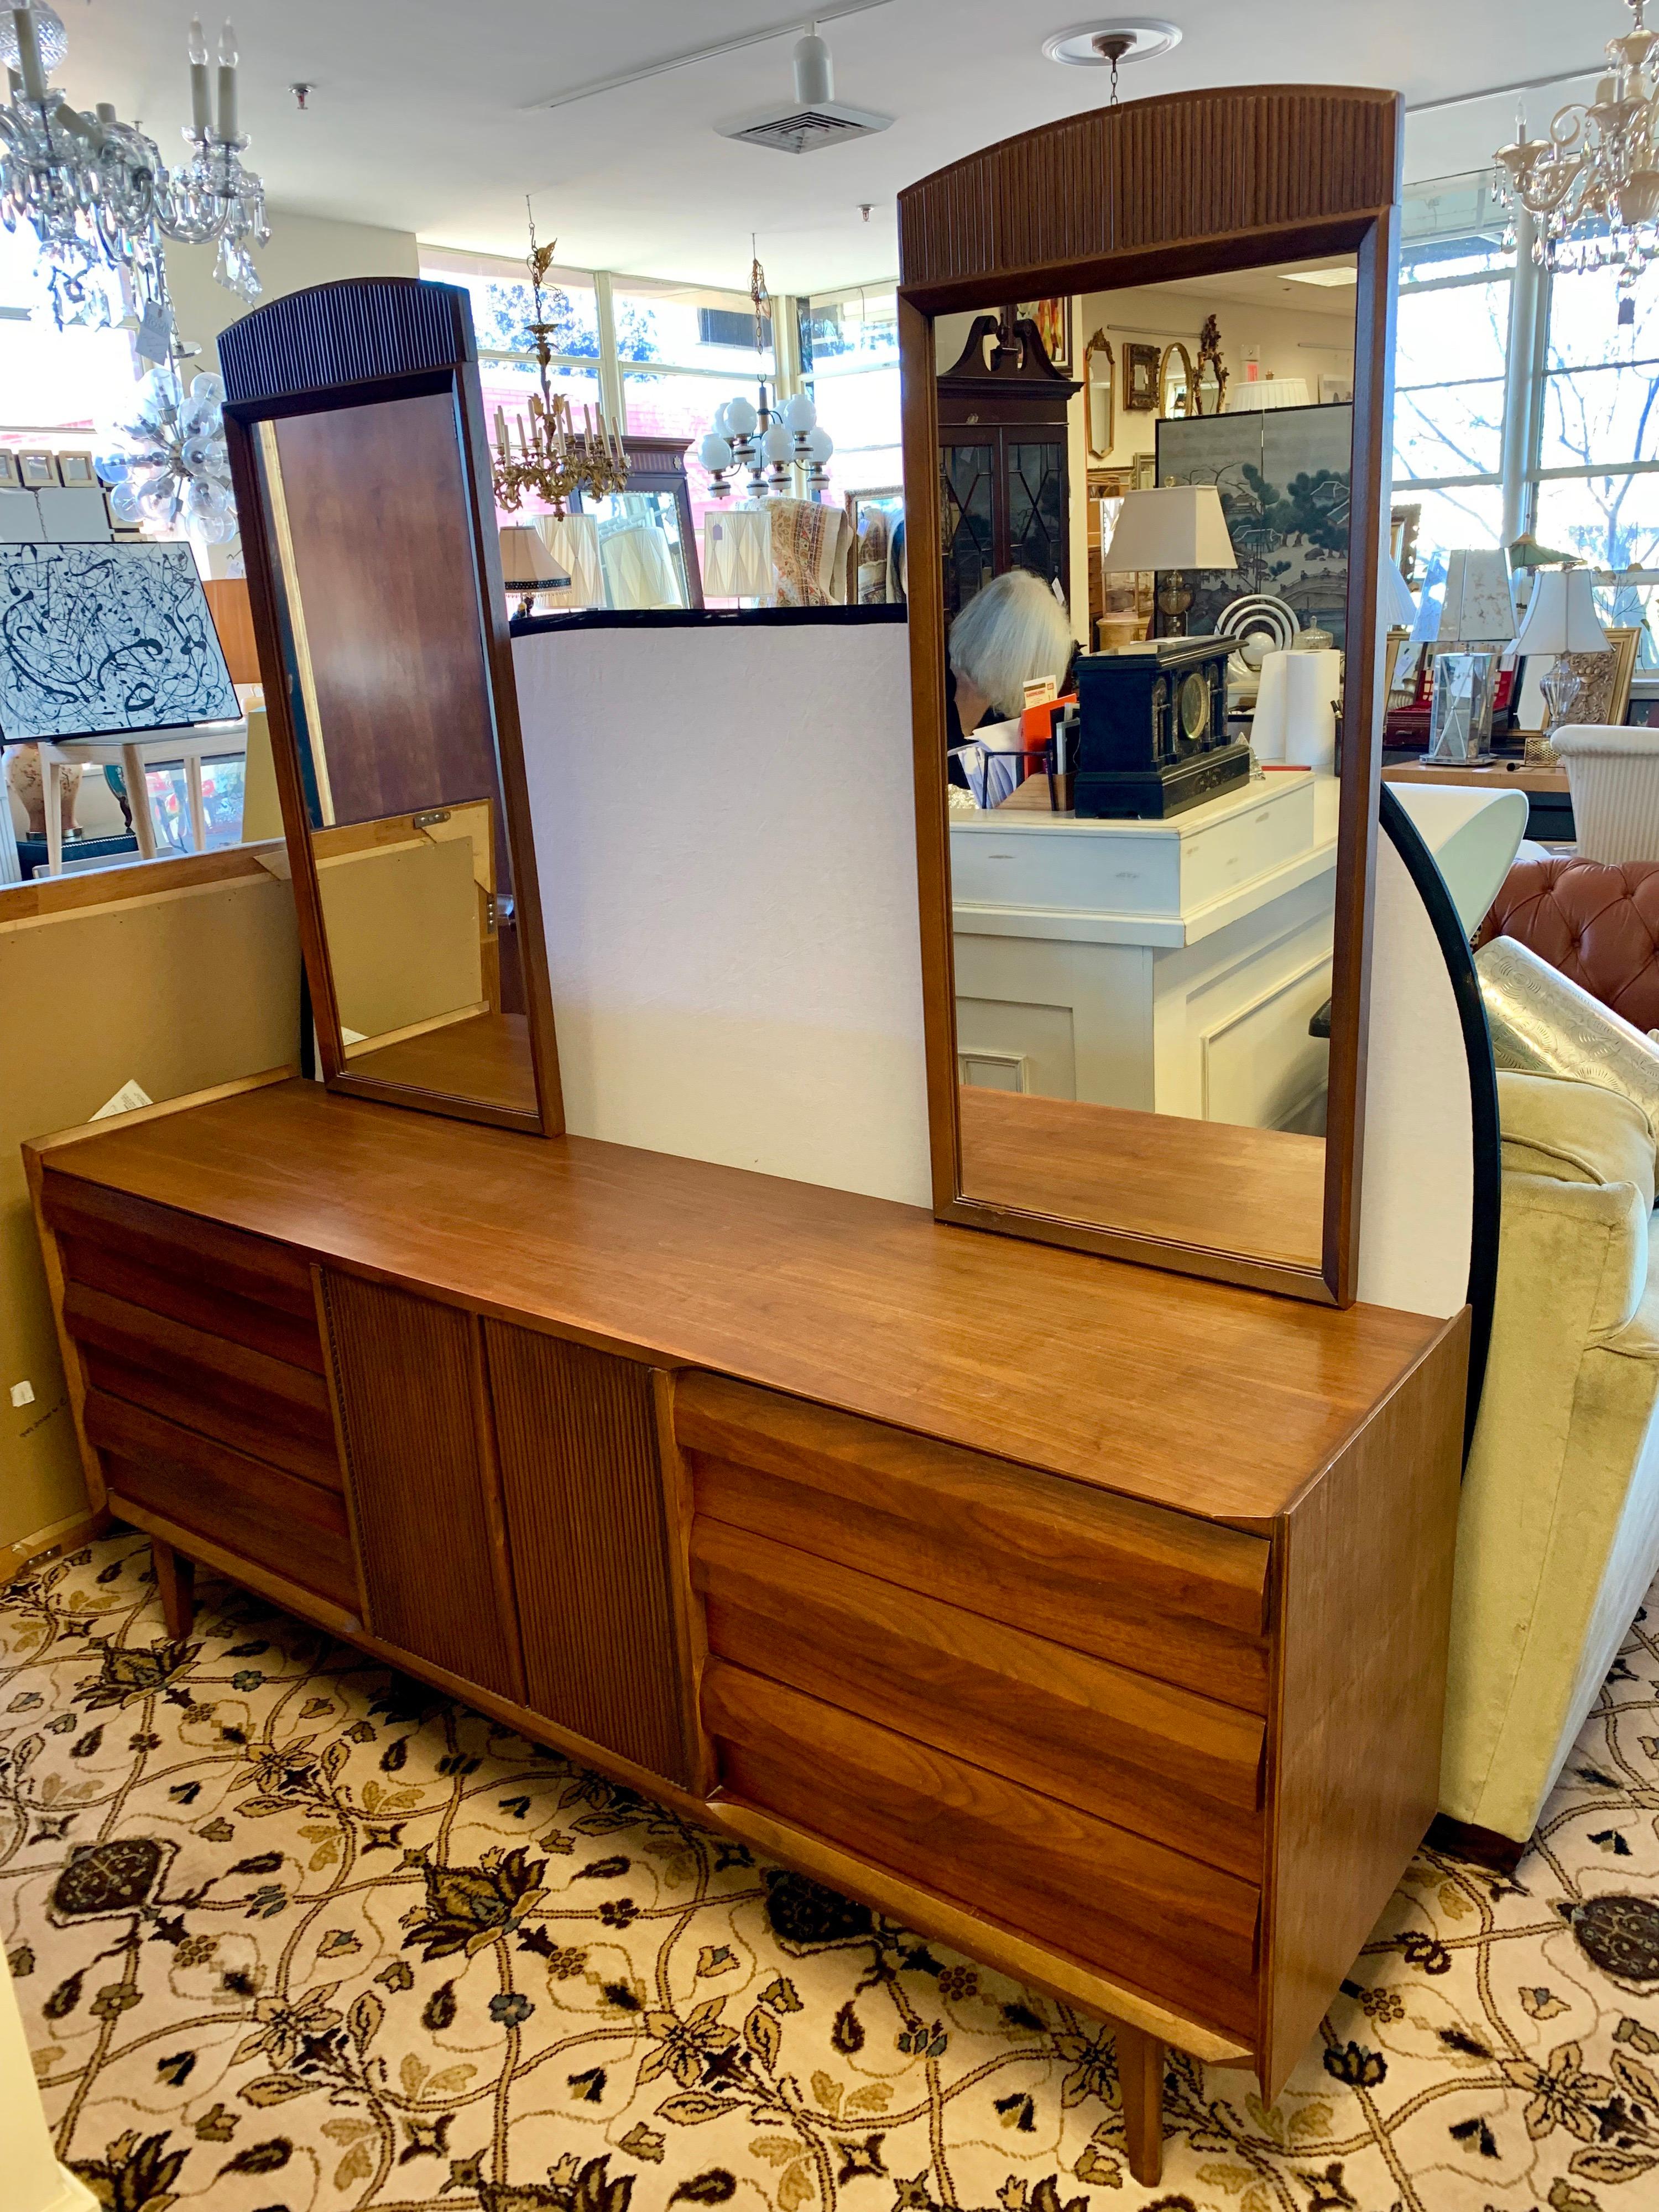 Stunning authentic Lane Altavista dresser with dual matching mirrors which can be unattached with ease.
You will see this piece retail online for up to $9500.00 but not through RH. A truly iconic piece of midcentury, American made, furniture. What